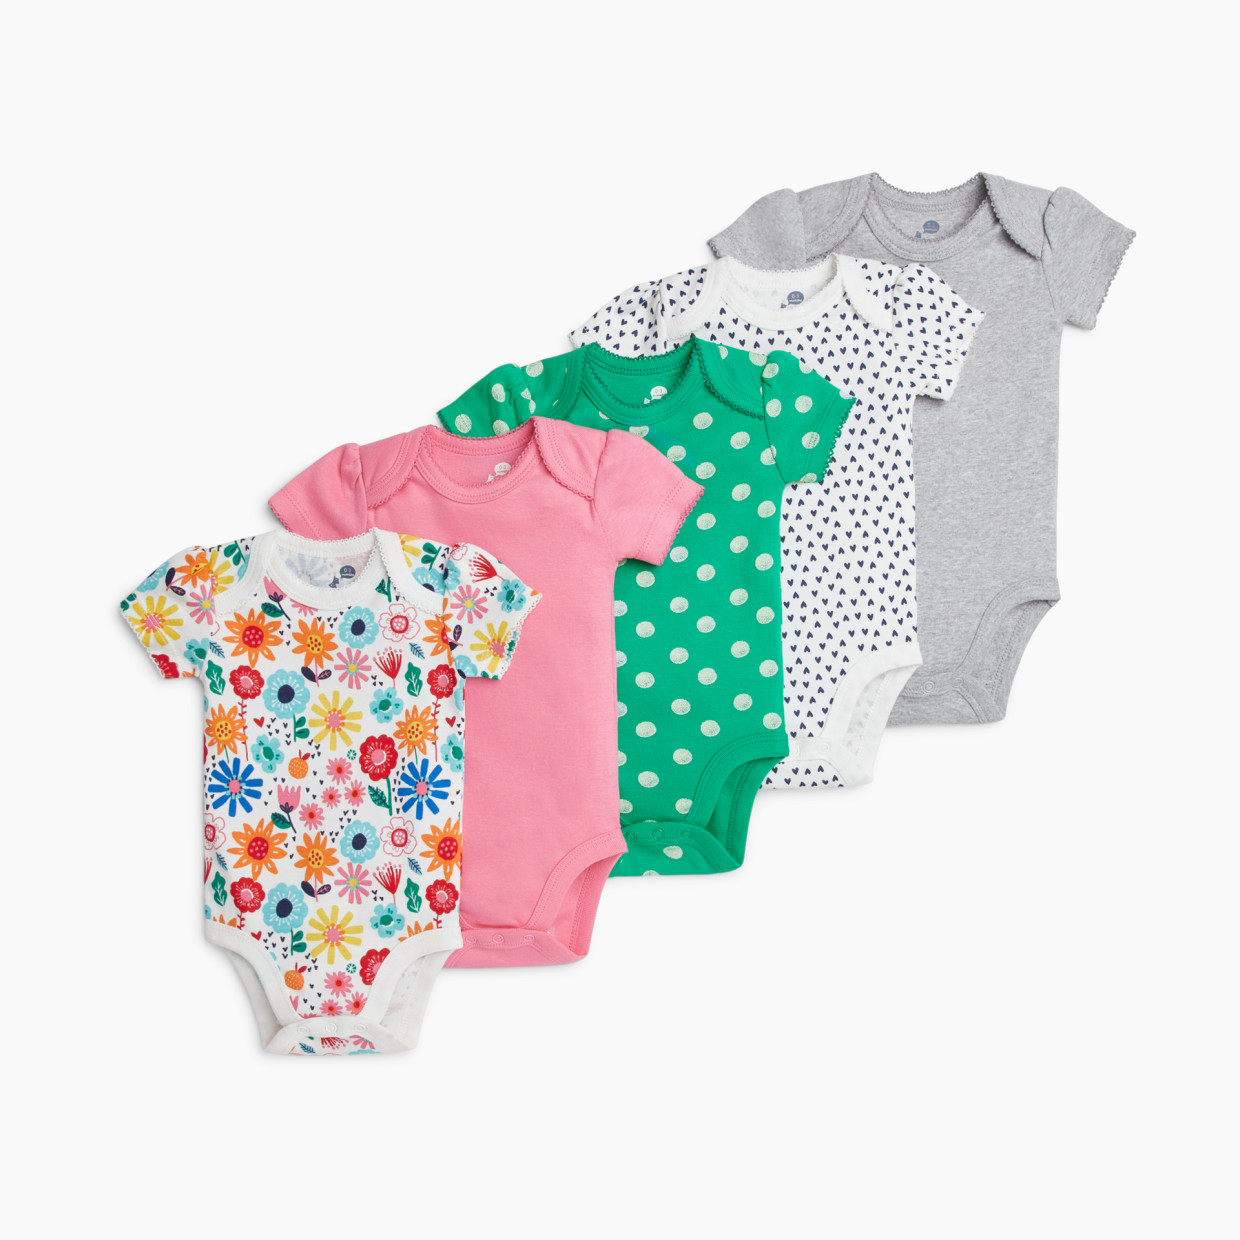 Small Story Short Sleeve Bodysuit Printed (5 Pack) - All Over Hearts, 0-3 M.